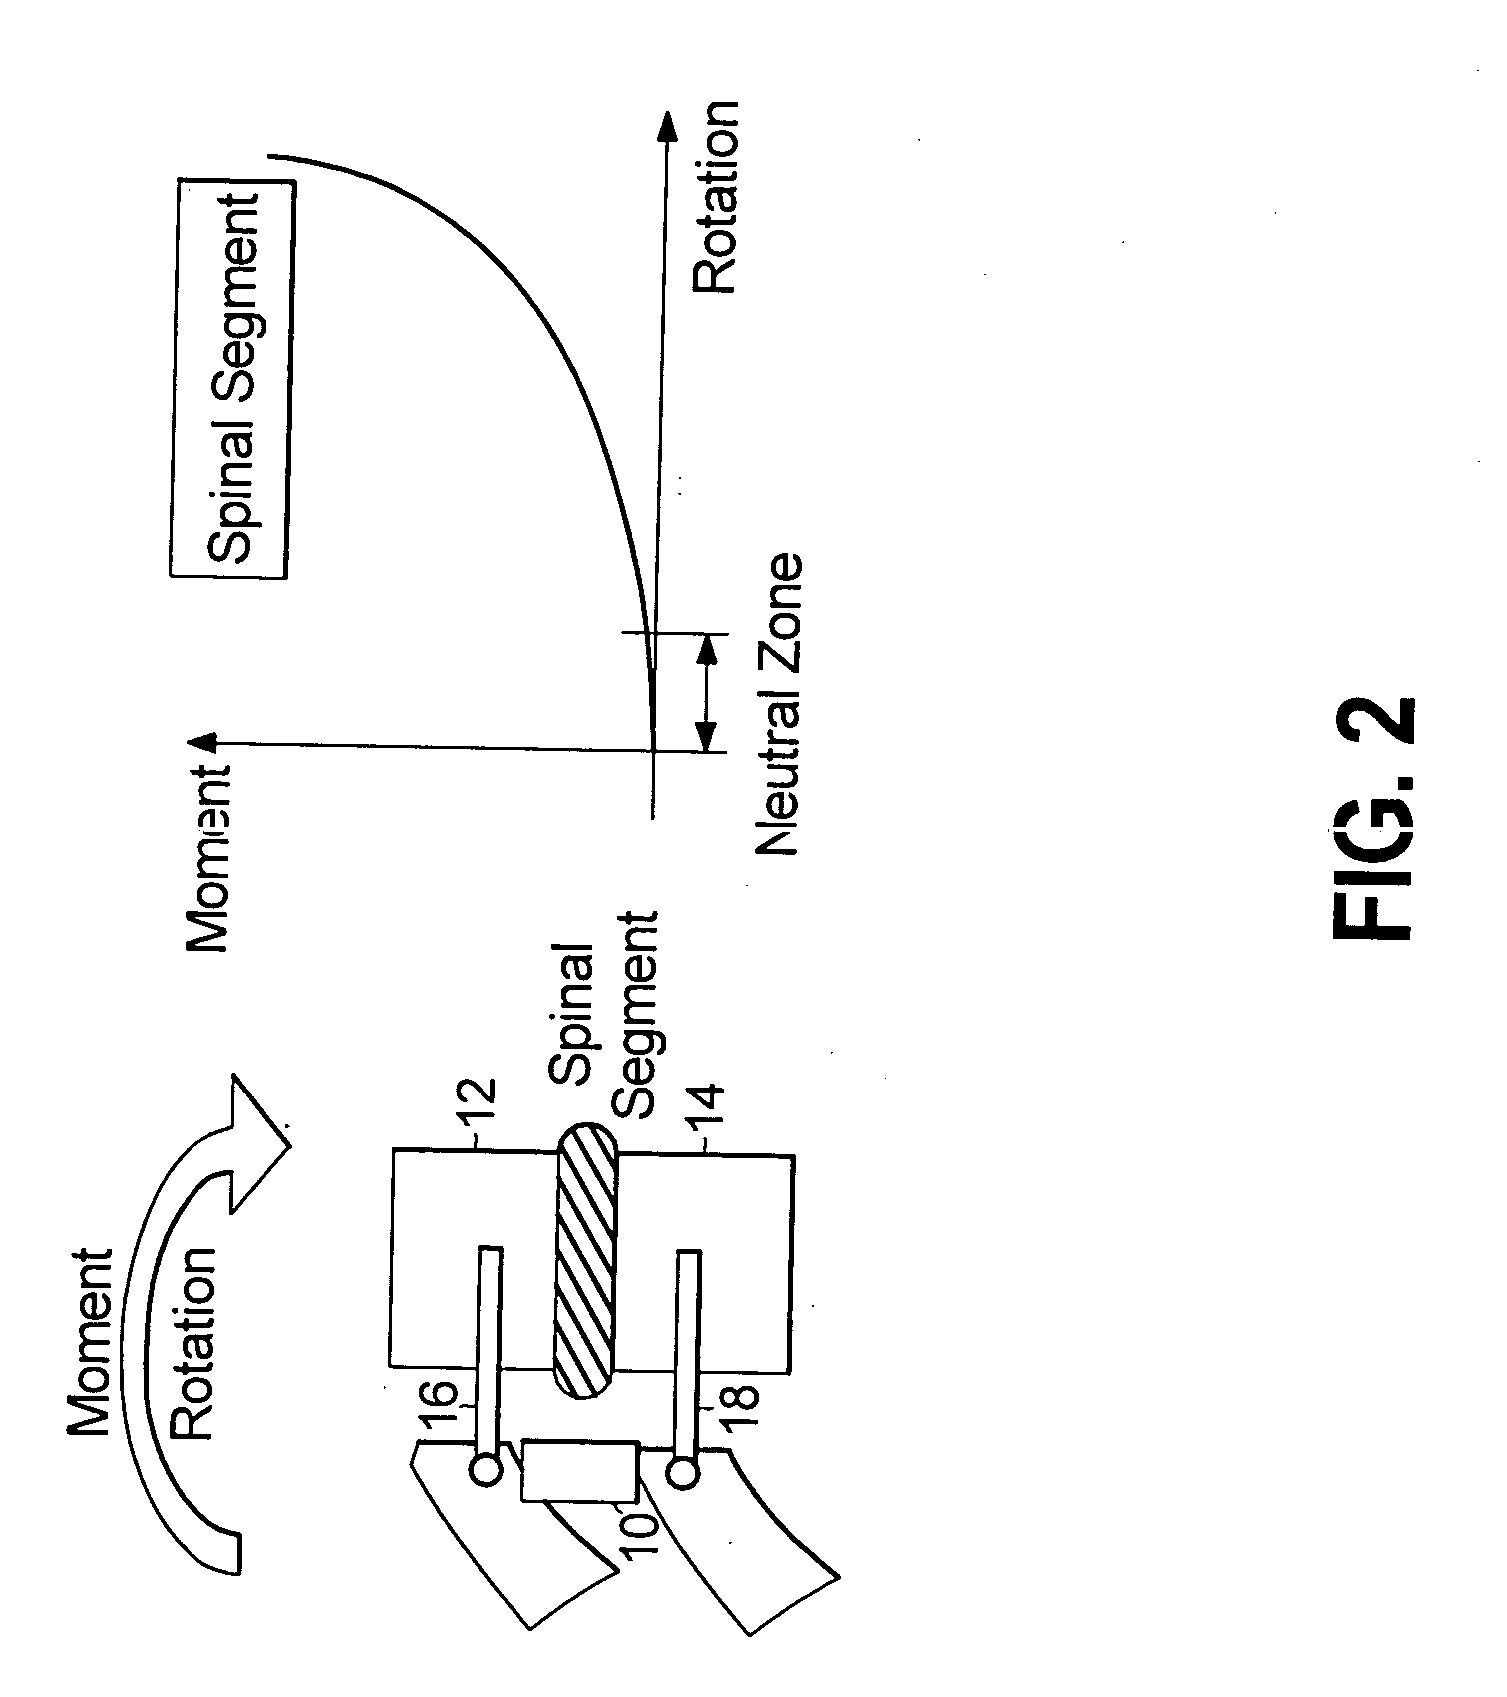 Pedicle screw devices, systems and methods having a preloaded set screw